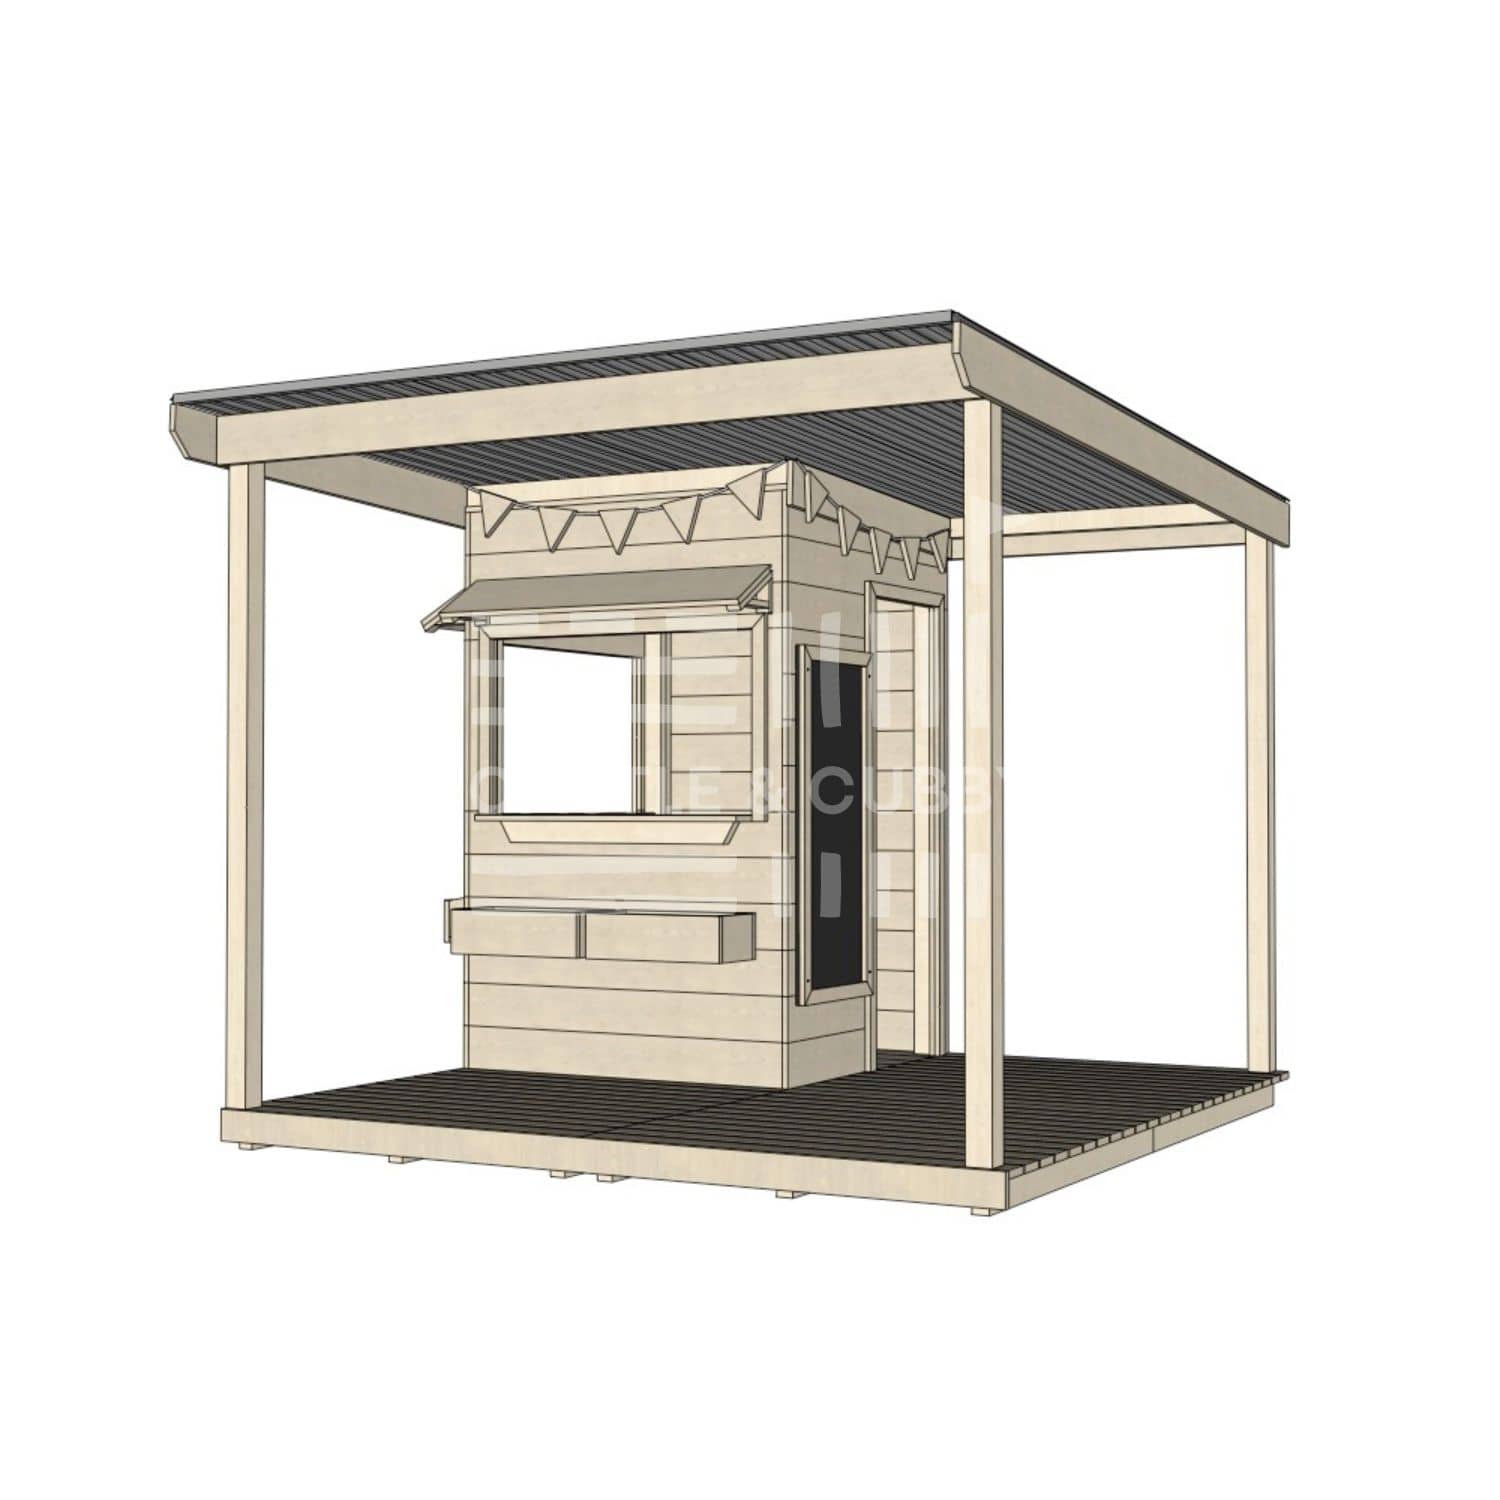 Commercial grade extended height little square timber cubby house with wraparound verandah and accessories